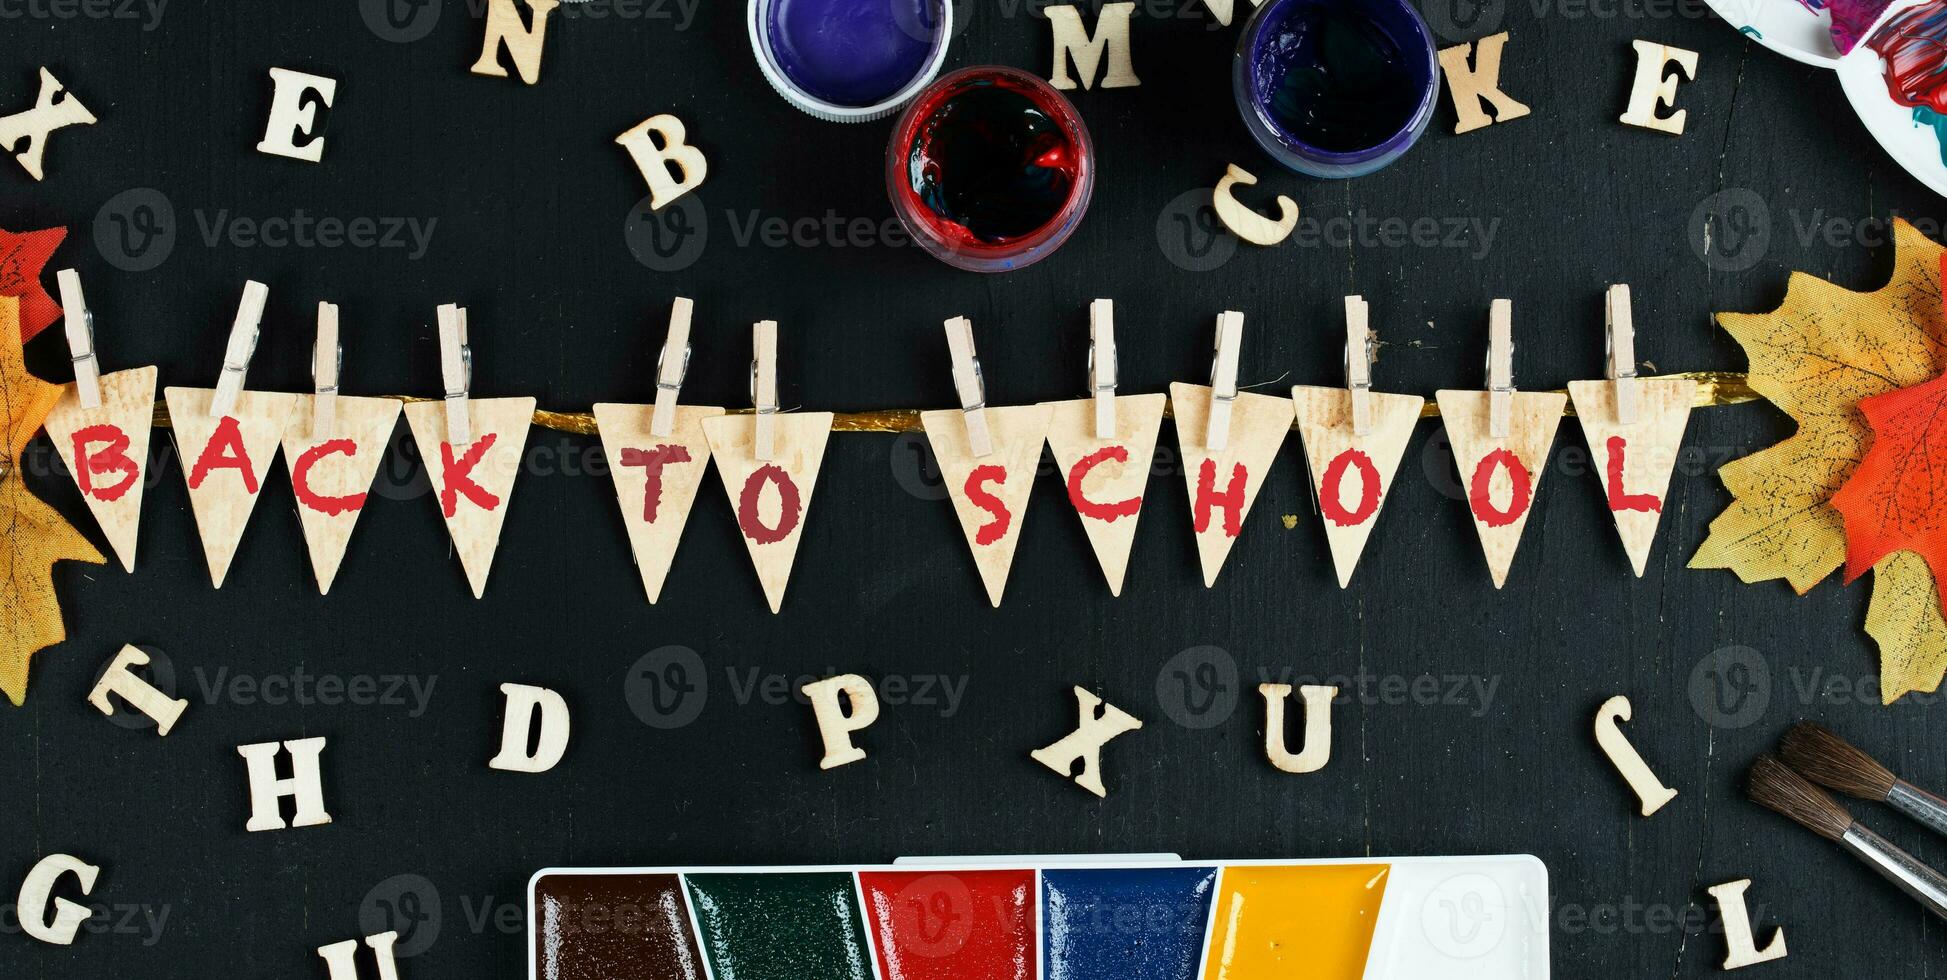 Back to school colorful background. photo